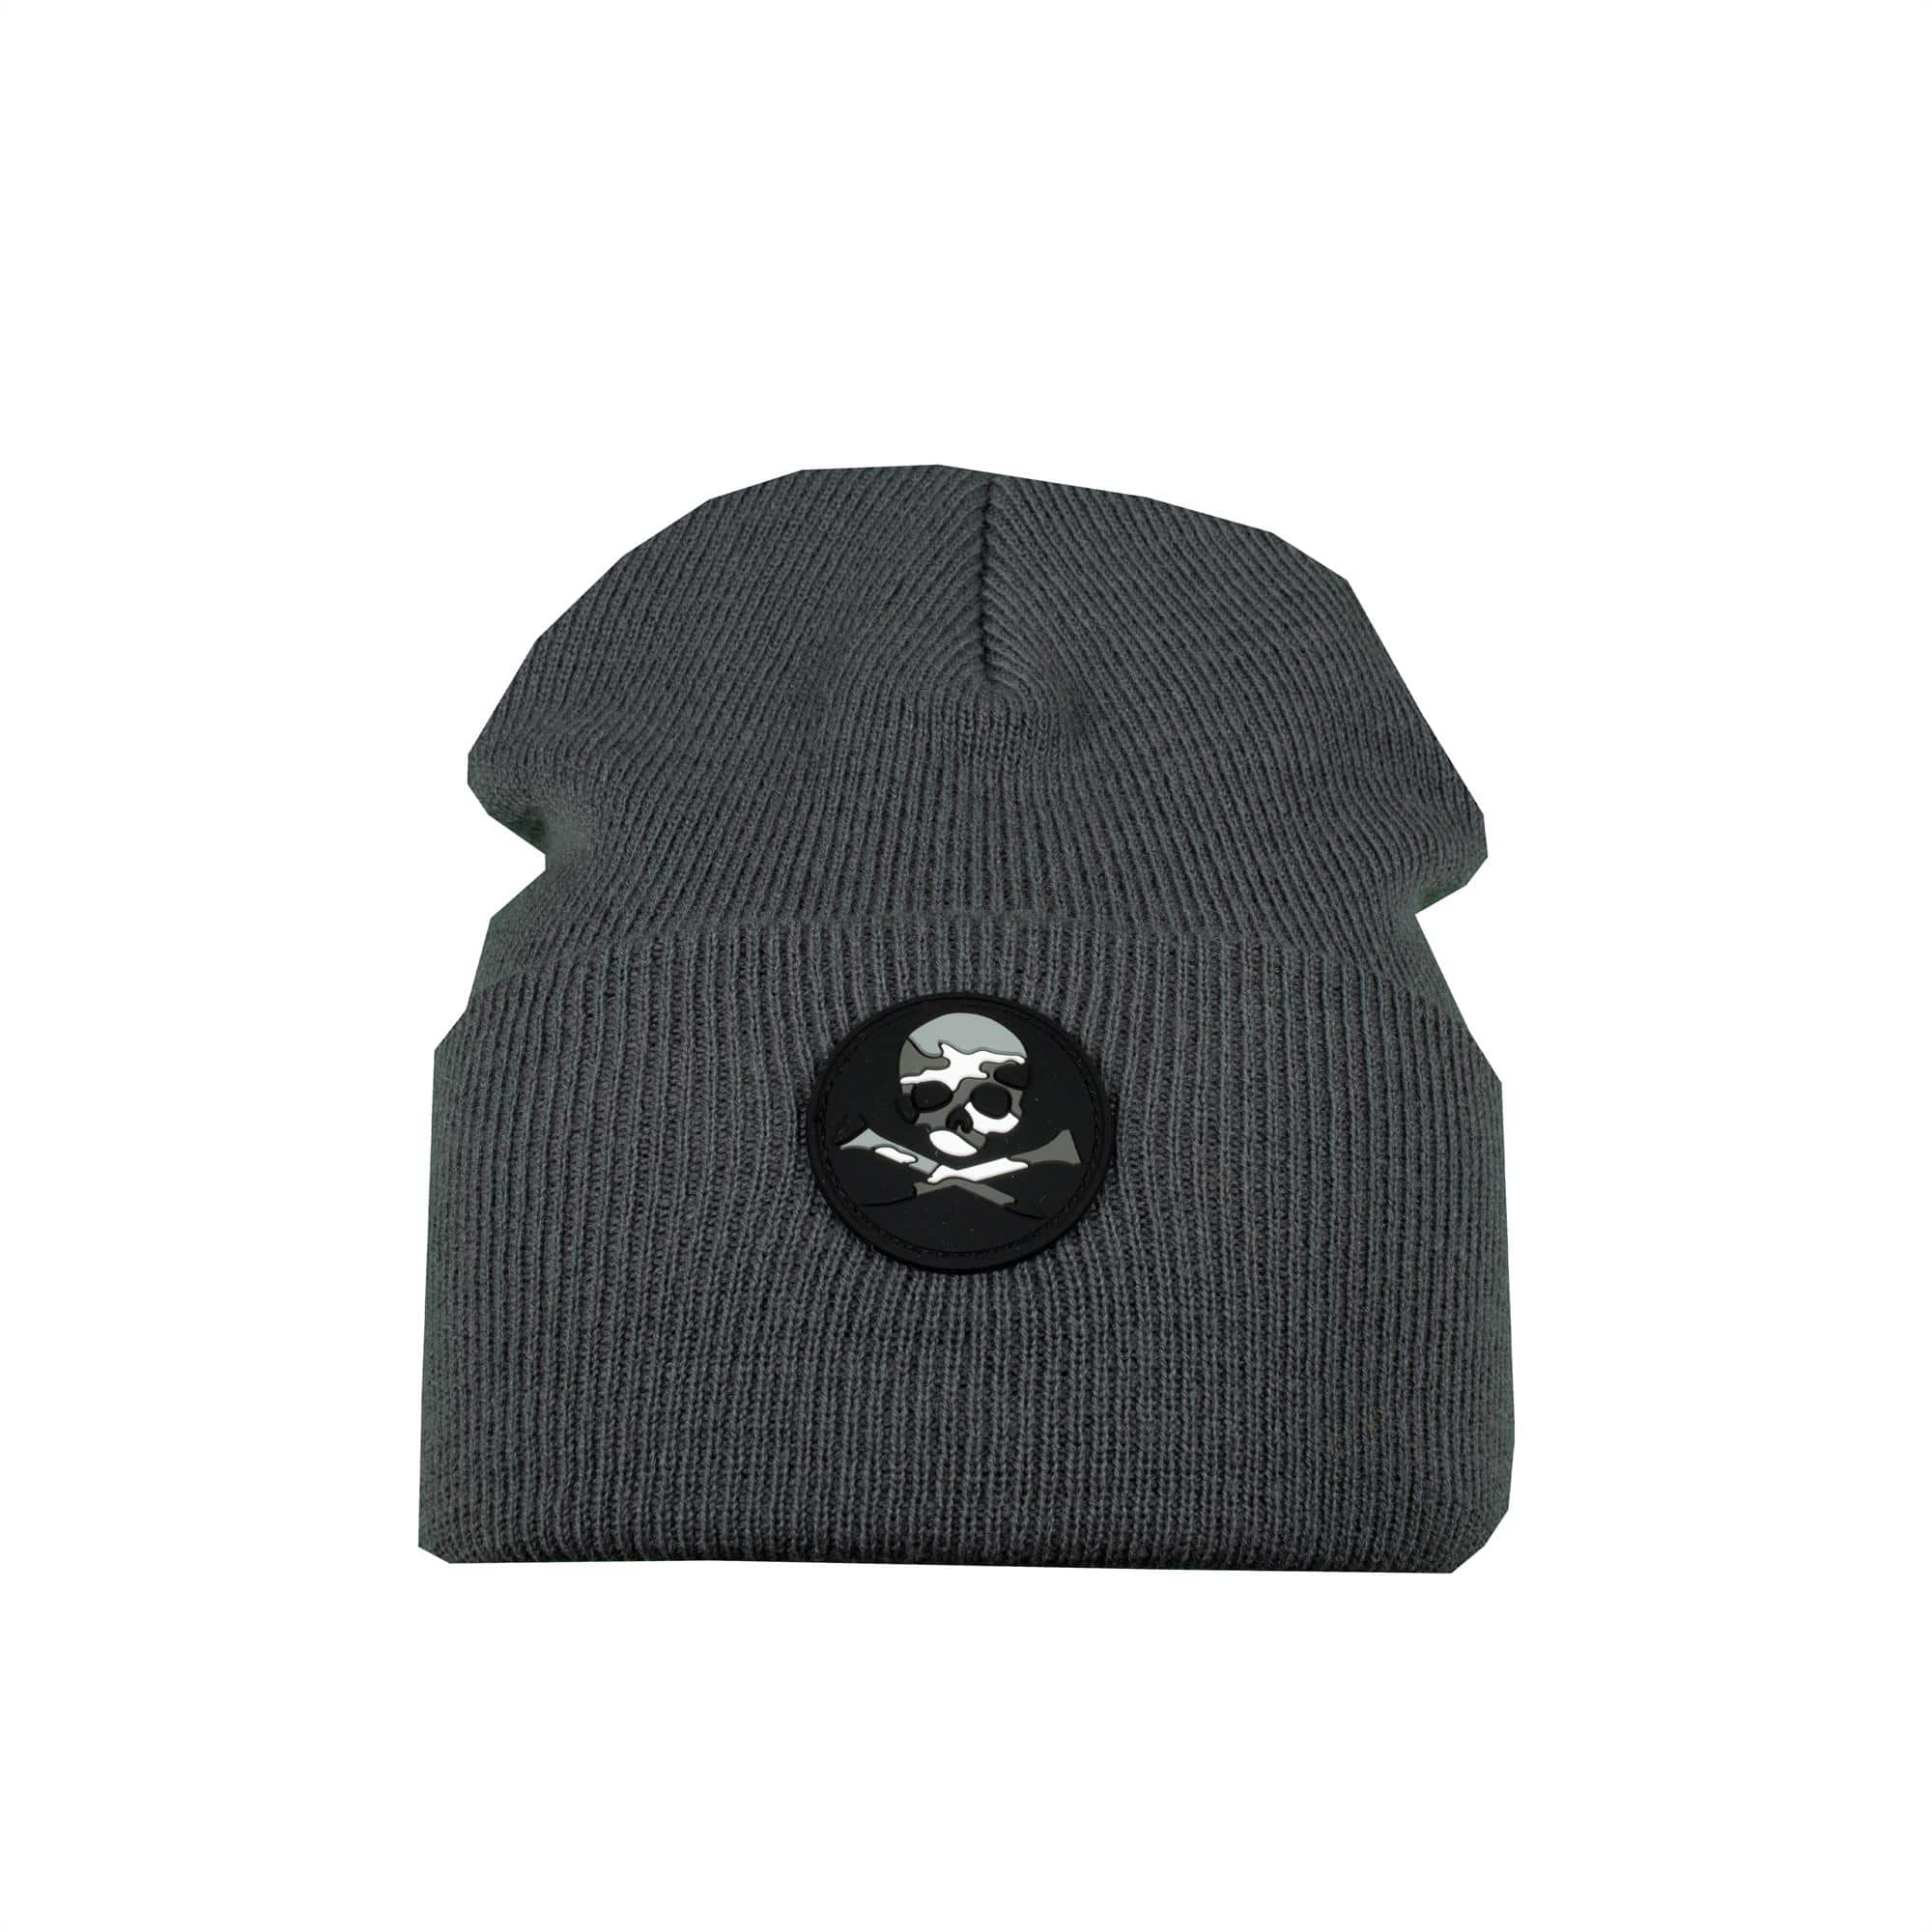 G/FORE Skull & T's Beanie Charcoal